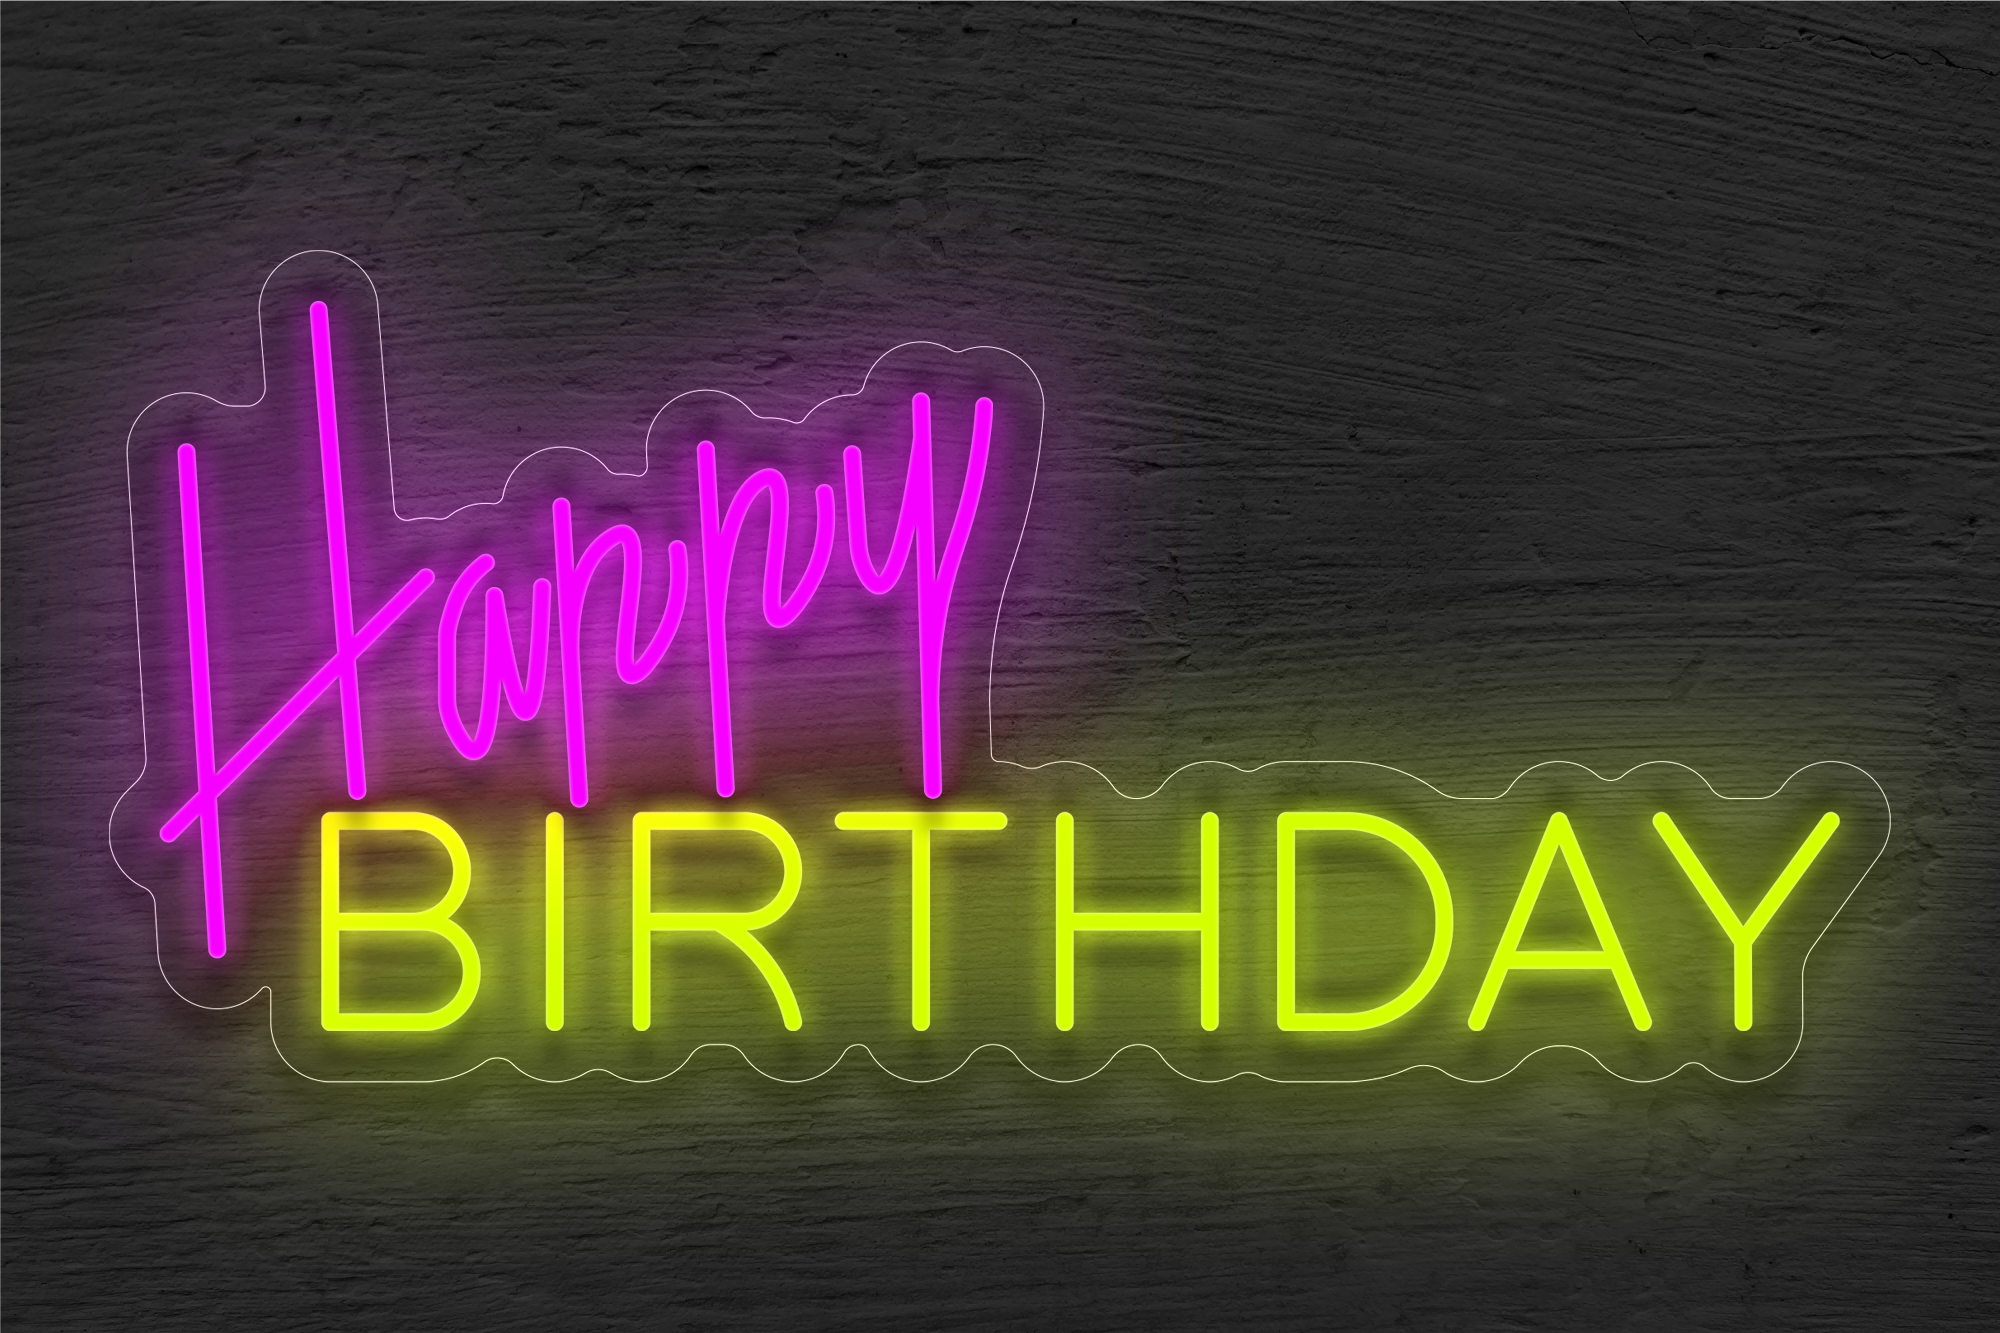 "Happy Birthday" in 2 Color LED Neon Sign